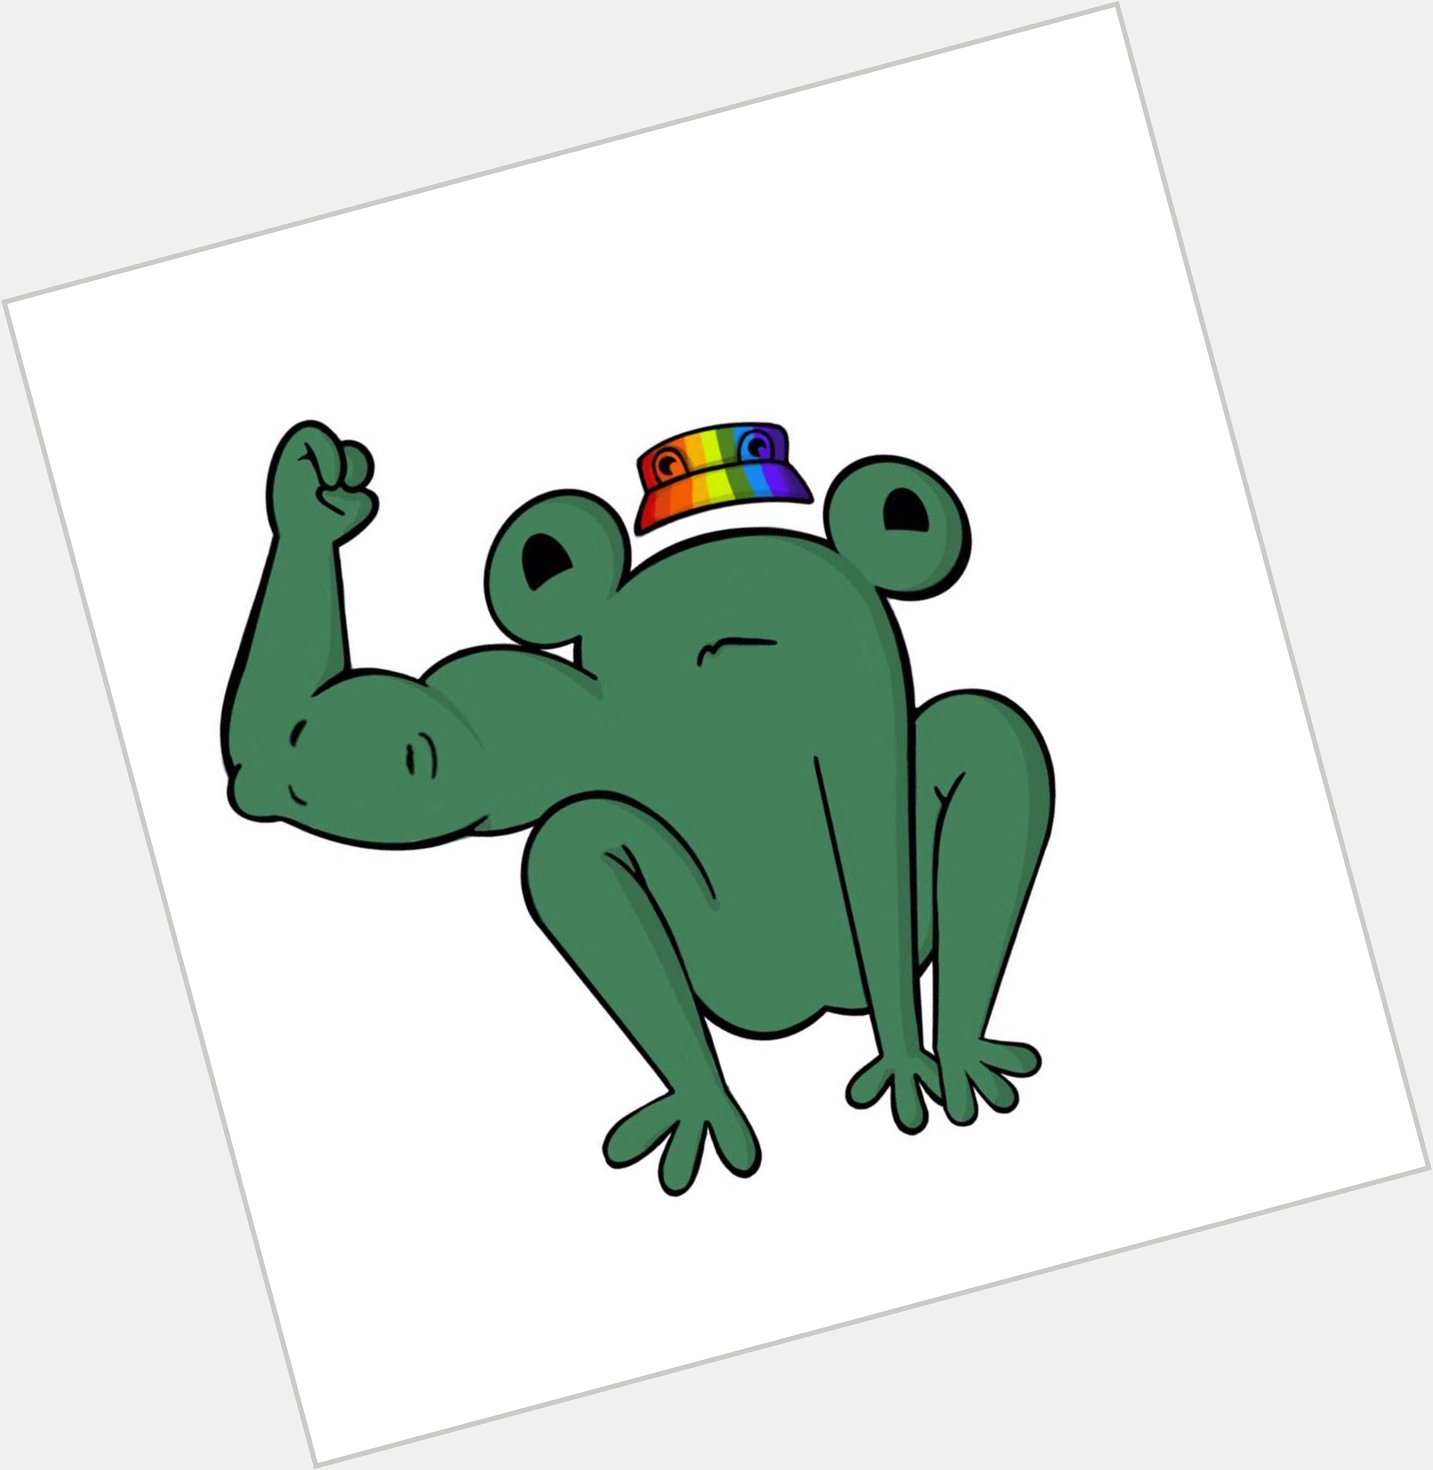 HAPPY BIRTHDAY BOOMER OUR FROGGY PRINCE SHEESH  U OLD ASS MAN have fun in the retirement home FeelsBirthdayMan 